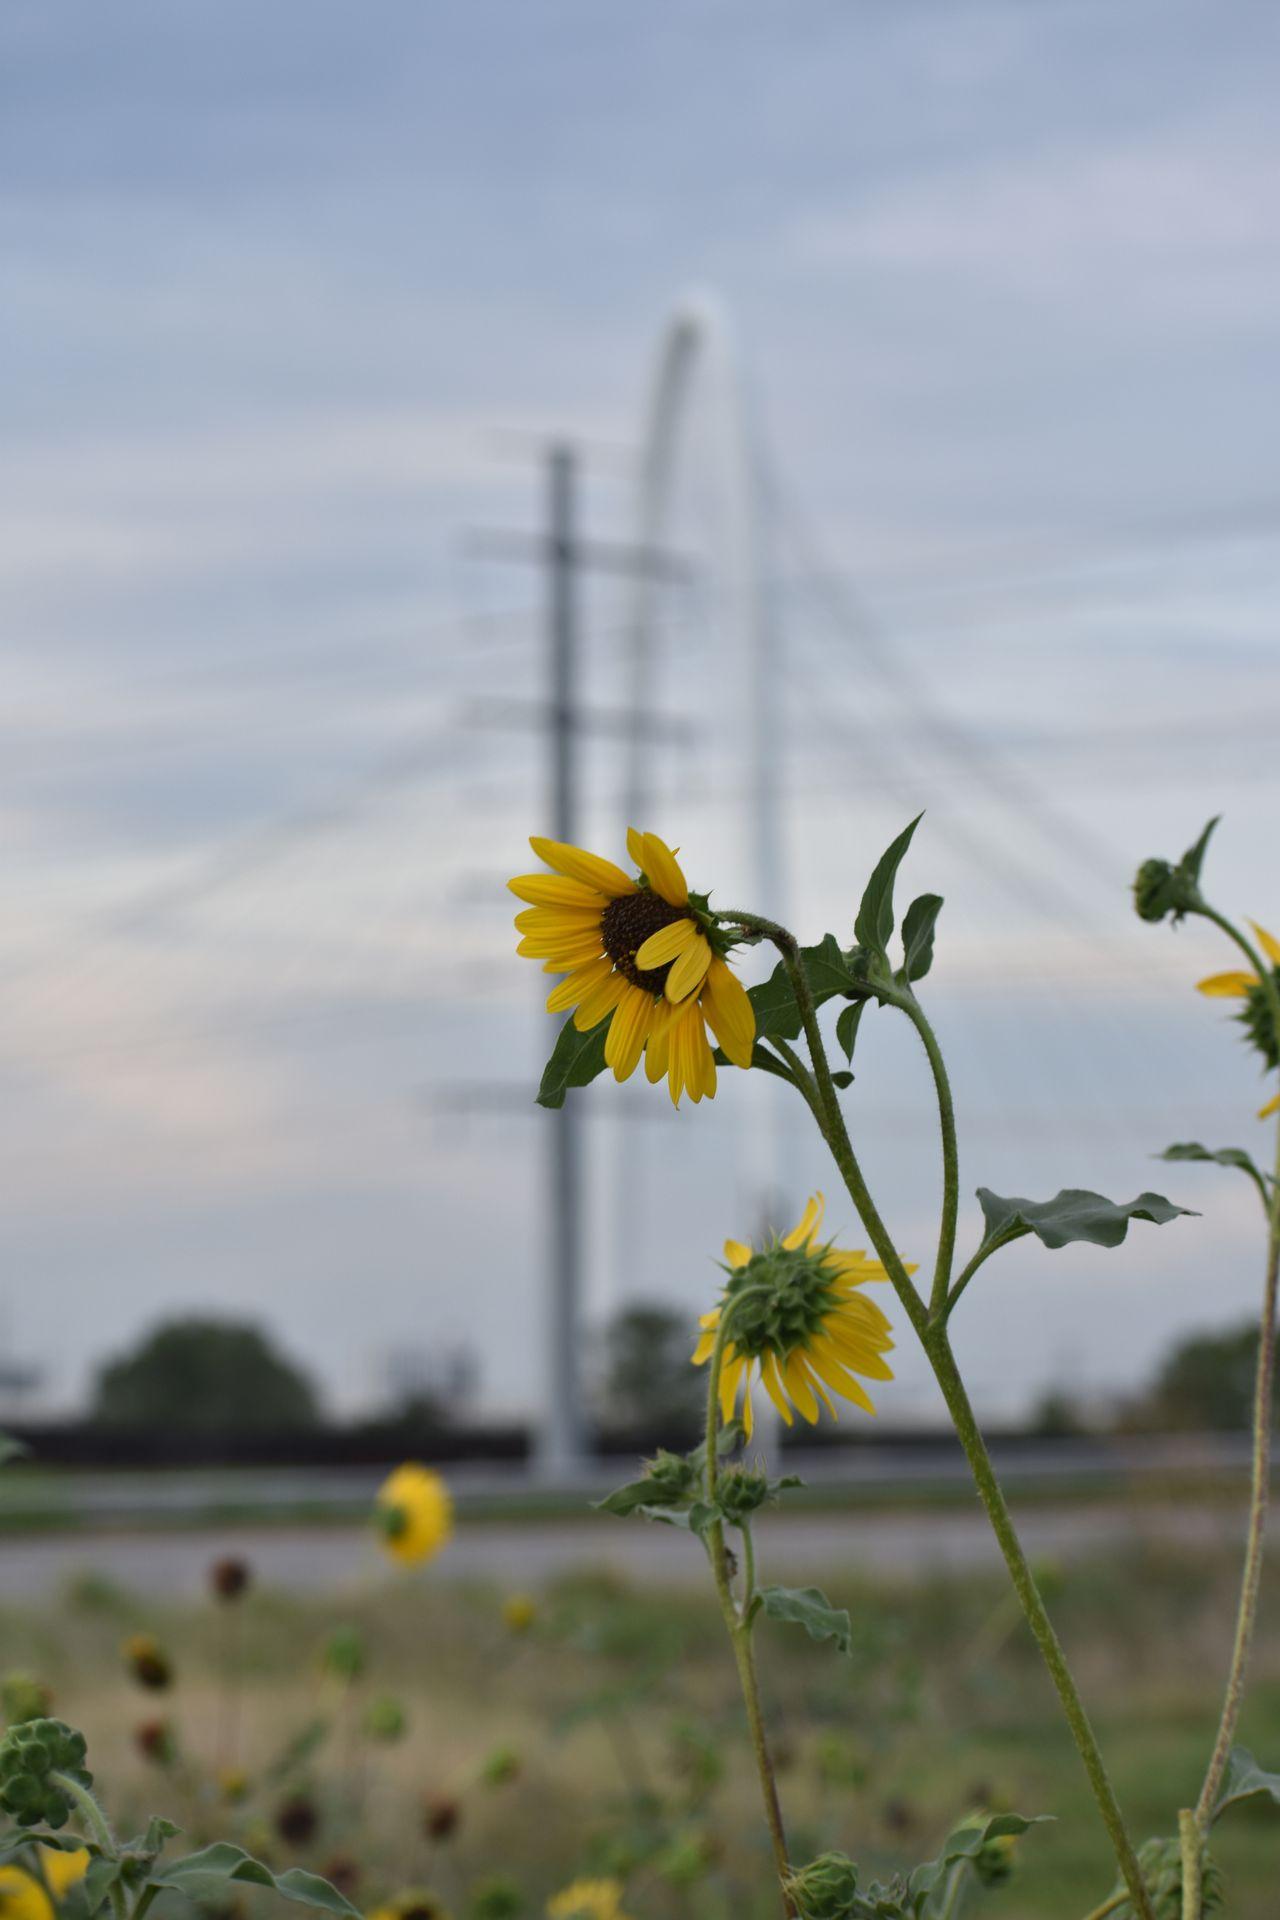 Sunflowers with a blurred bridge in the background.